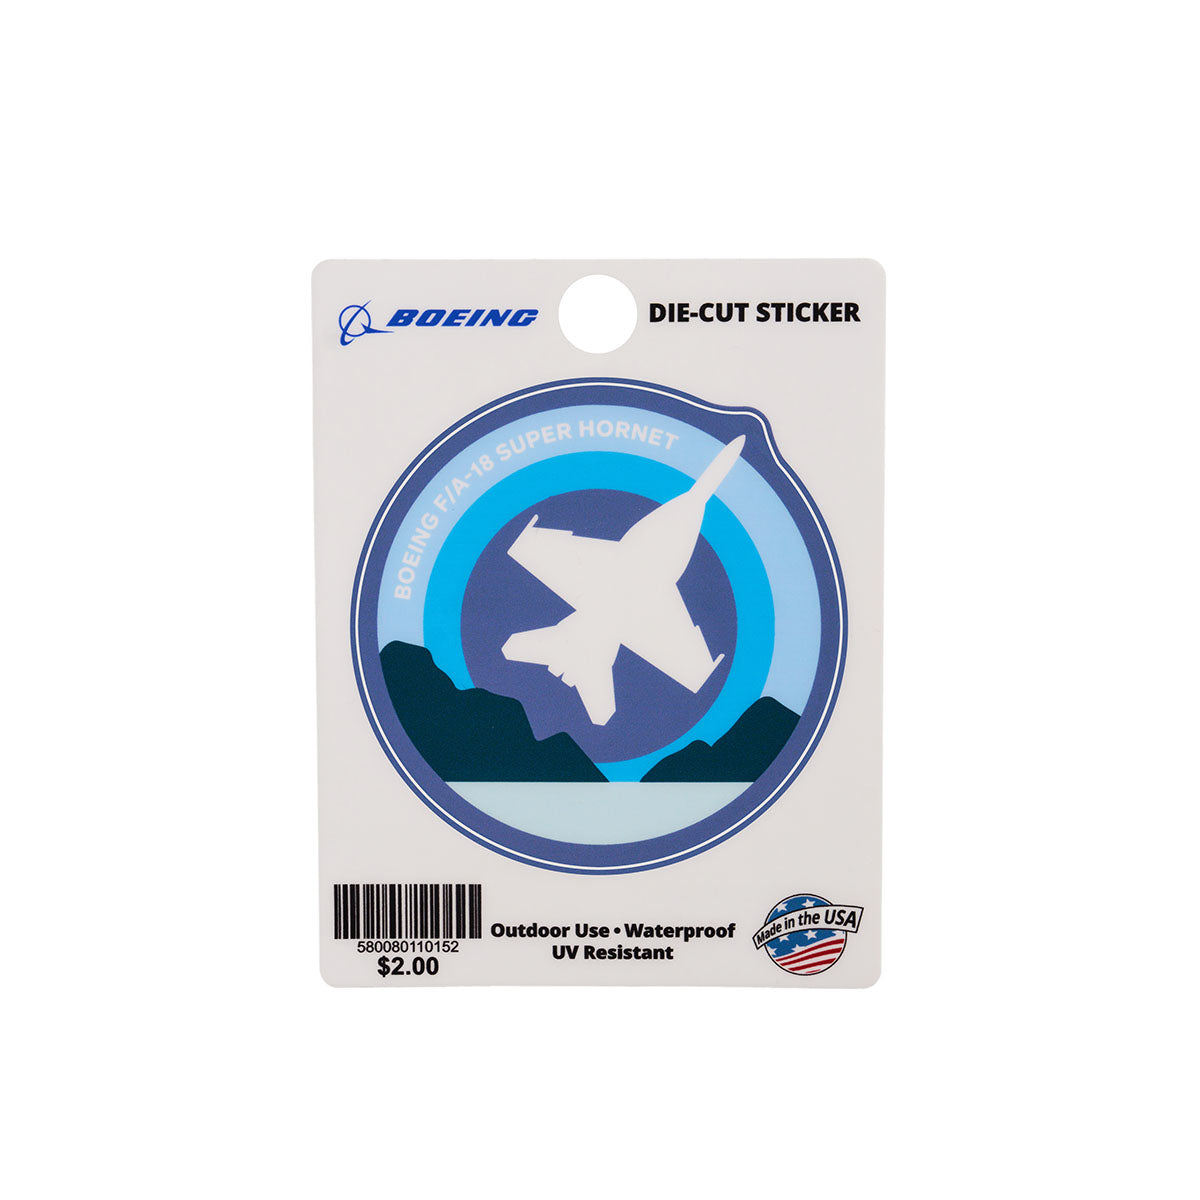 Skyward sticker, featuring the iconic Boeing Boeing F/A-18 Super Hornet in a roundel design.